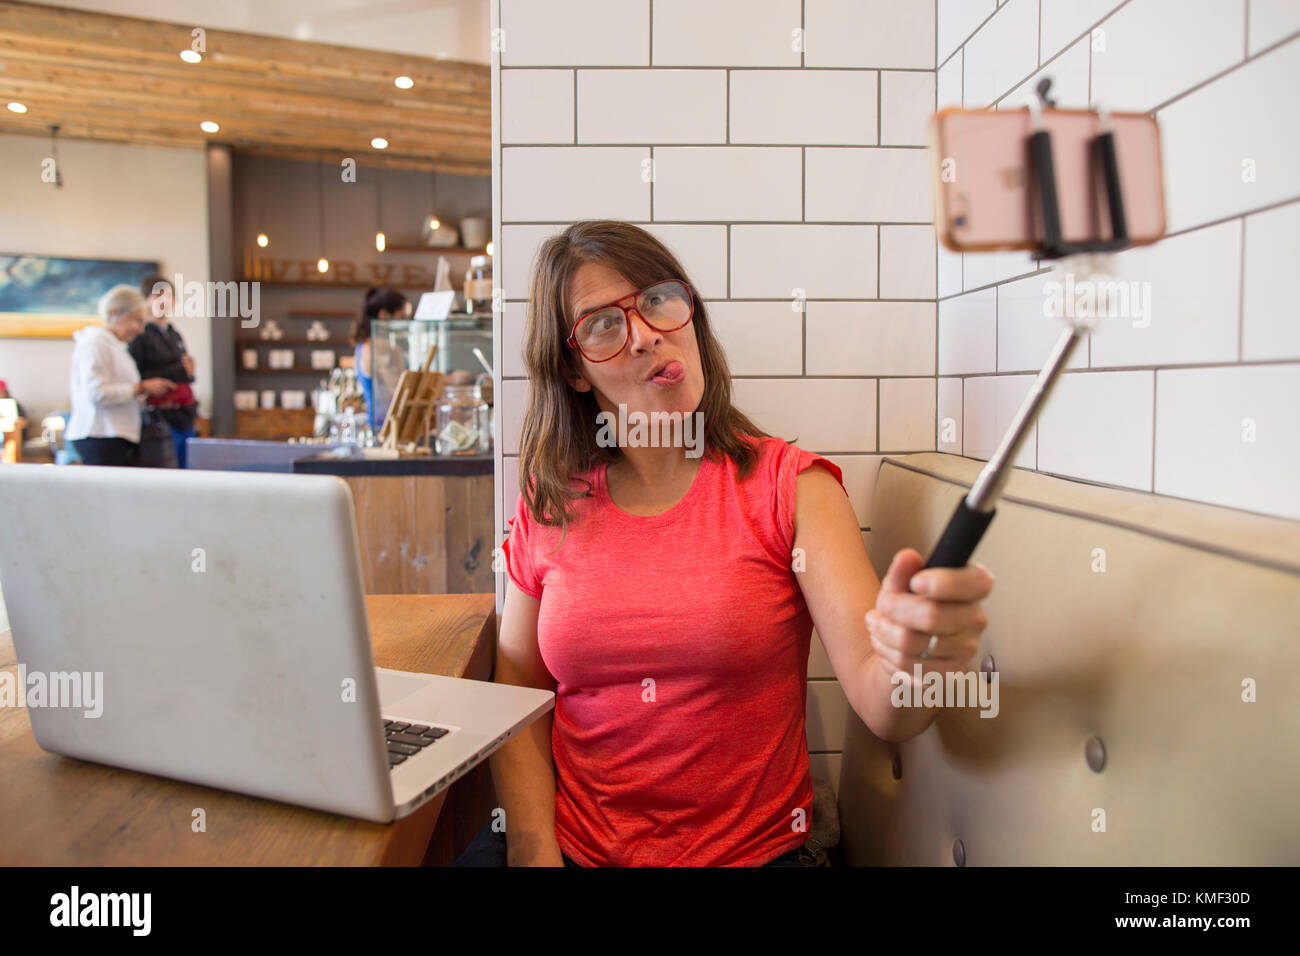 Woman making funny face while taking selfie in cafe with selfie stick,Santa Cruz,California,USA Stock Photo